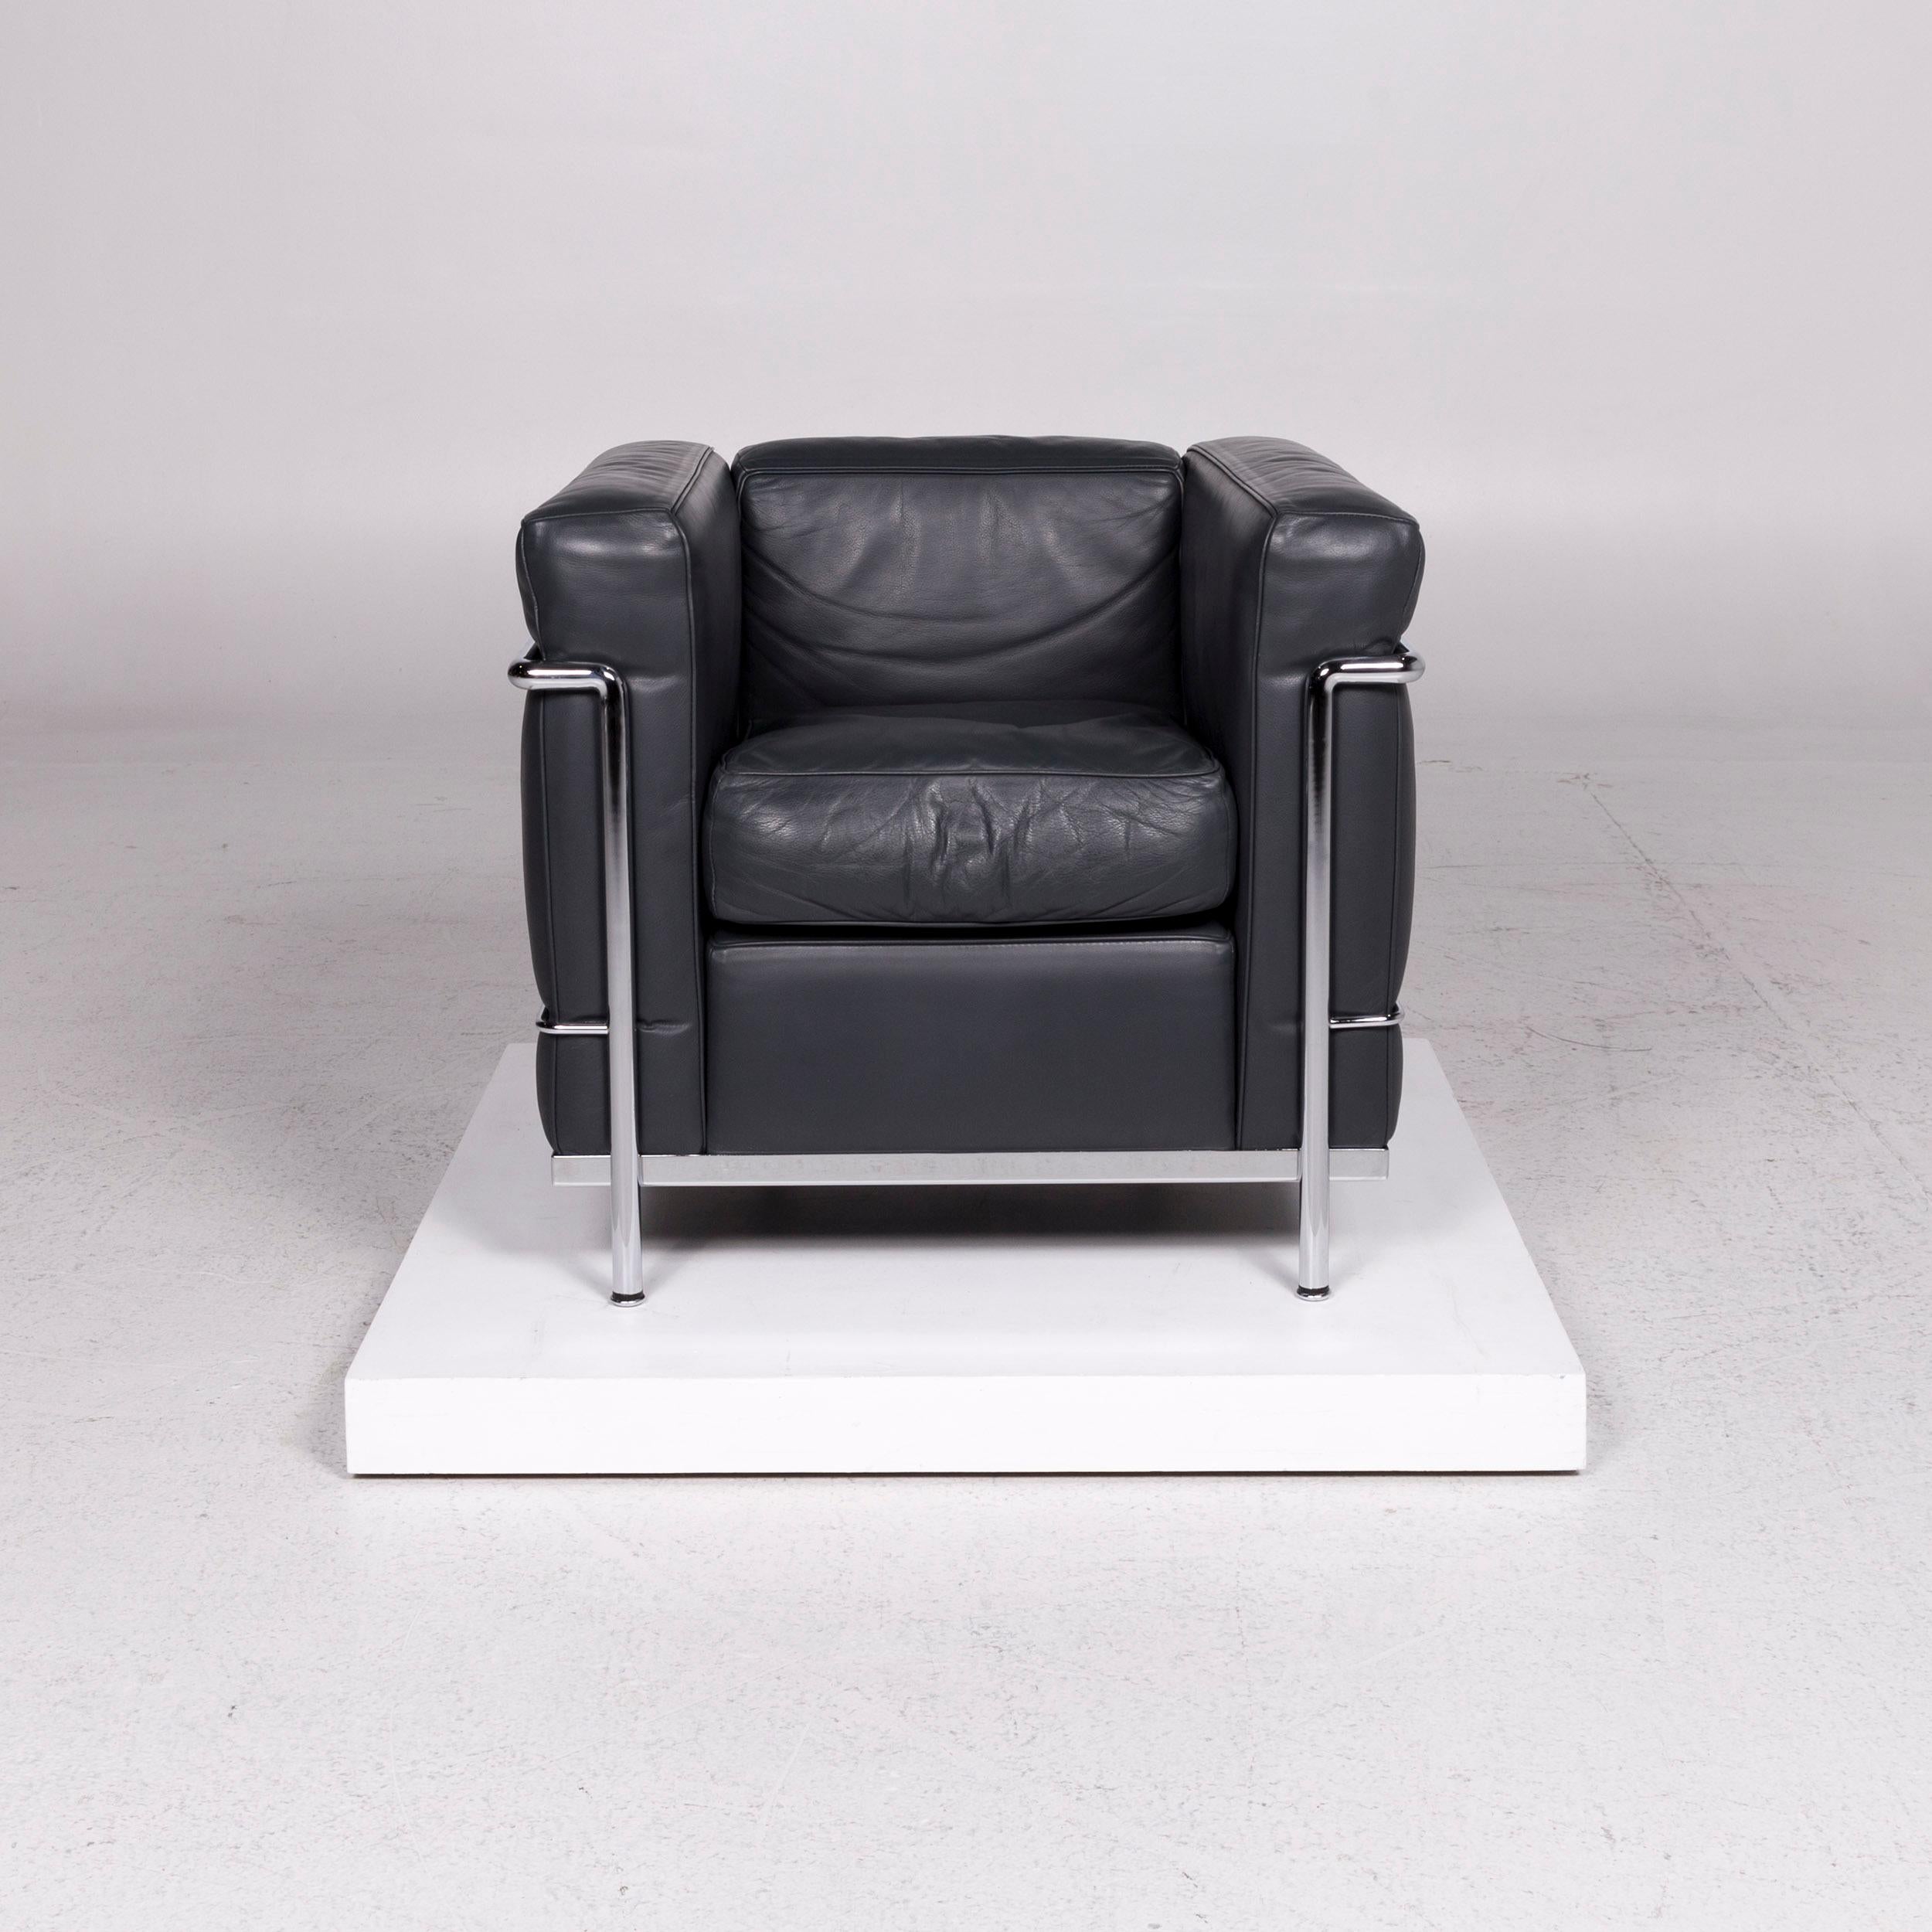 We bring to you a Cassina Le Corbusier LC 2 leather armchair anthracite gray.


 Product measurements in centimeters:
 

Depth 71
Width 77
Height 68
Seat-height 47
Rest-height 68
Seat-depth 52
Seat-width 43
Back-height 23.
 